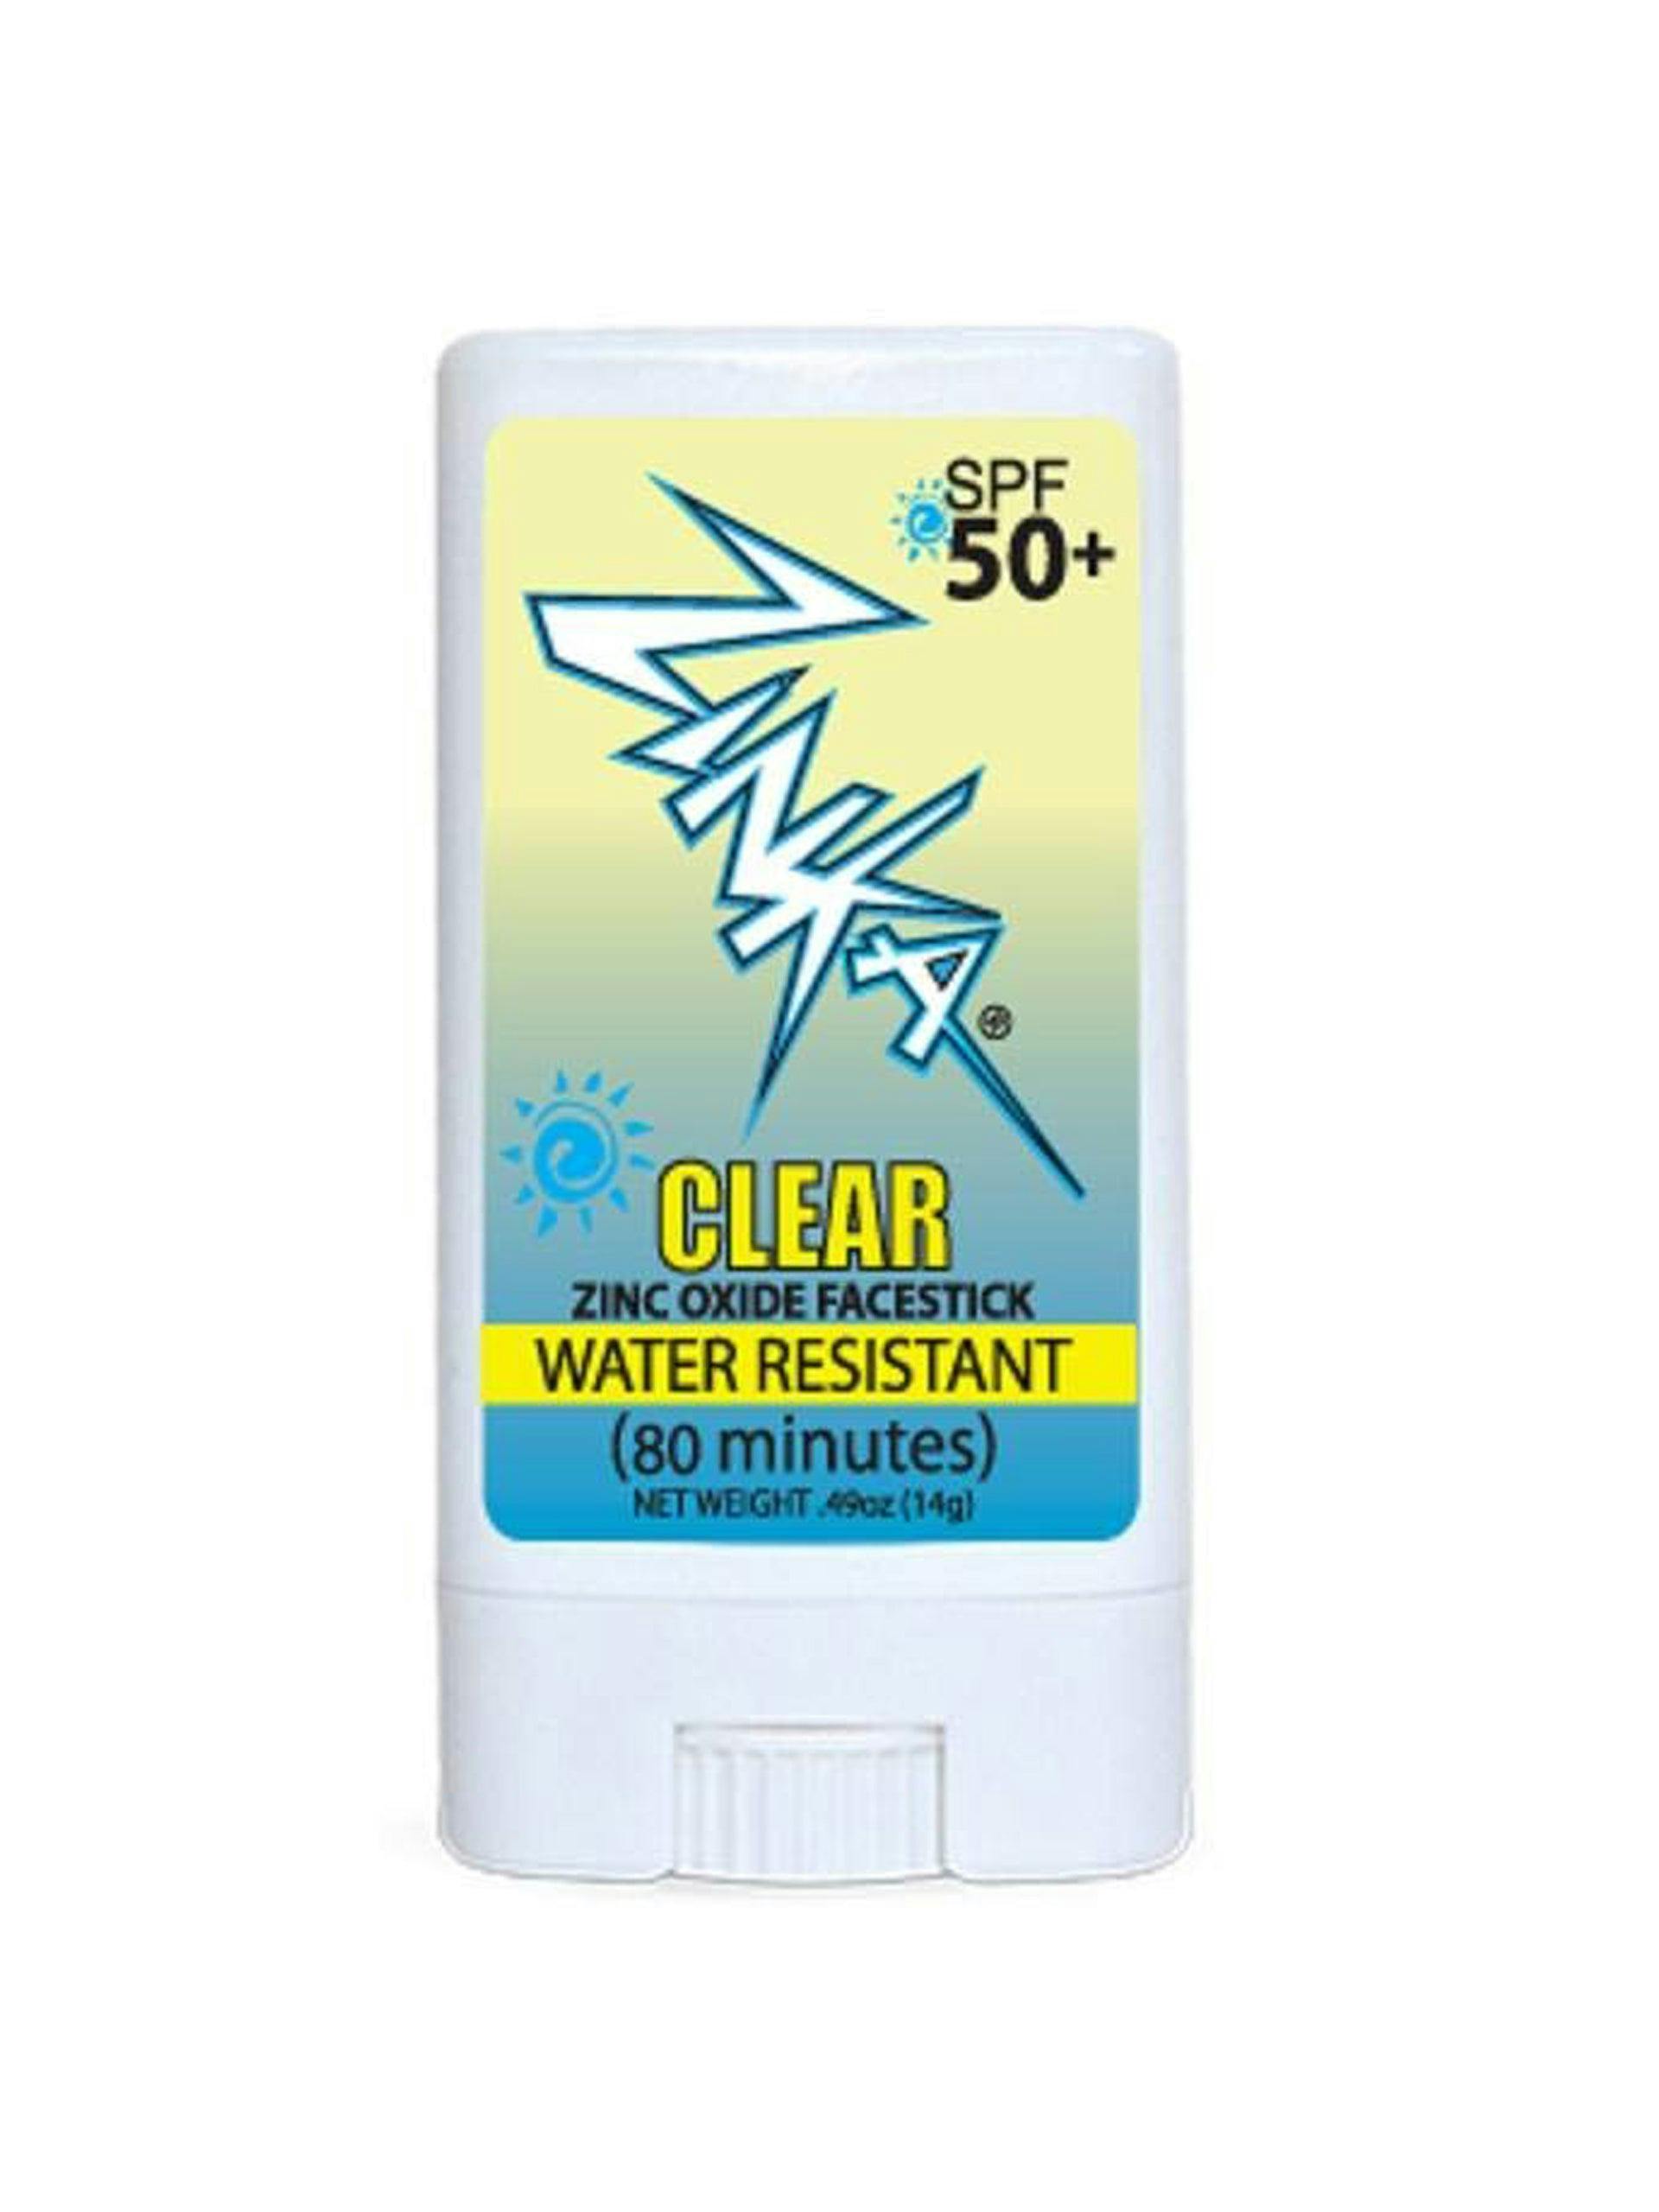 Water resistant spf 50 face sunscreen